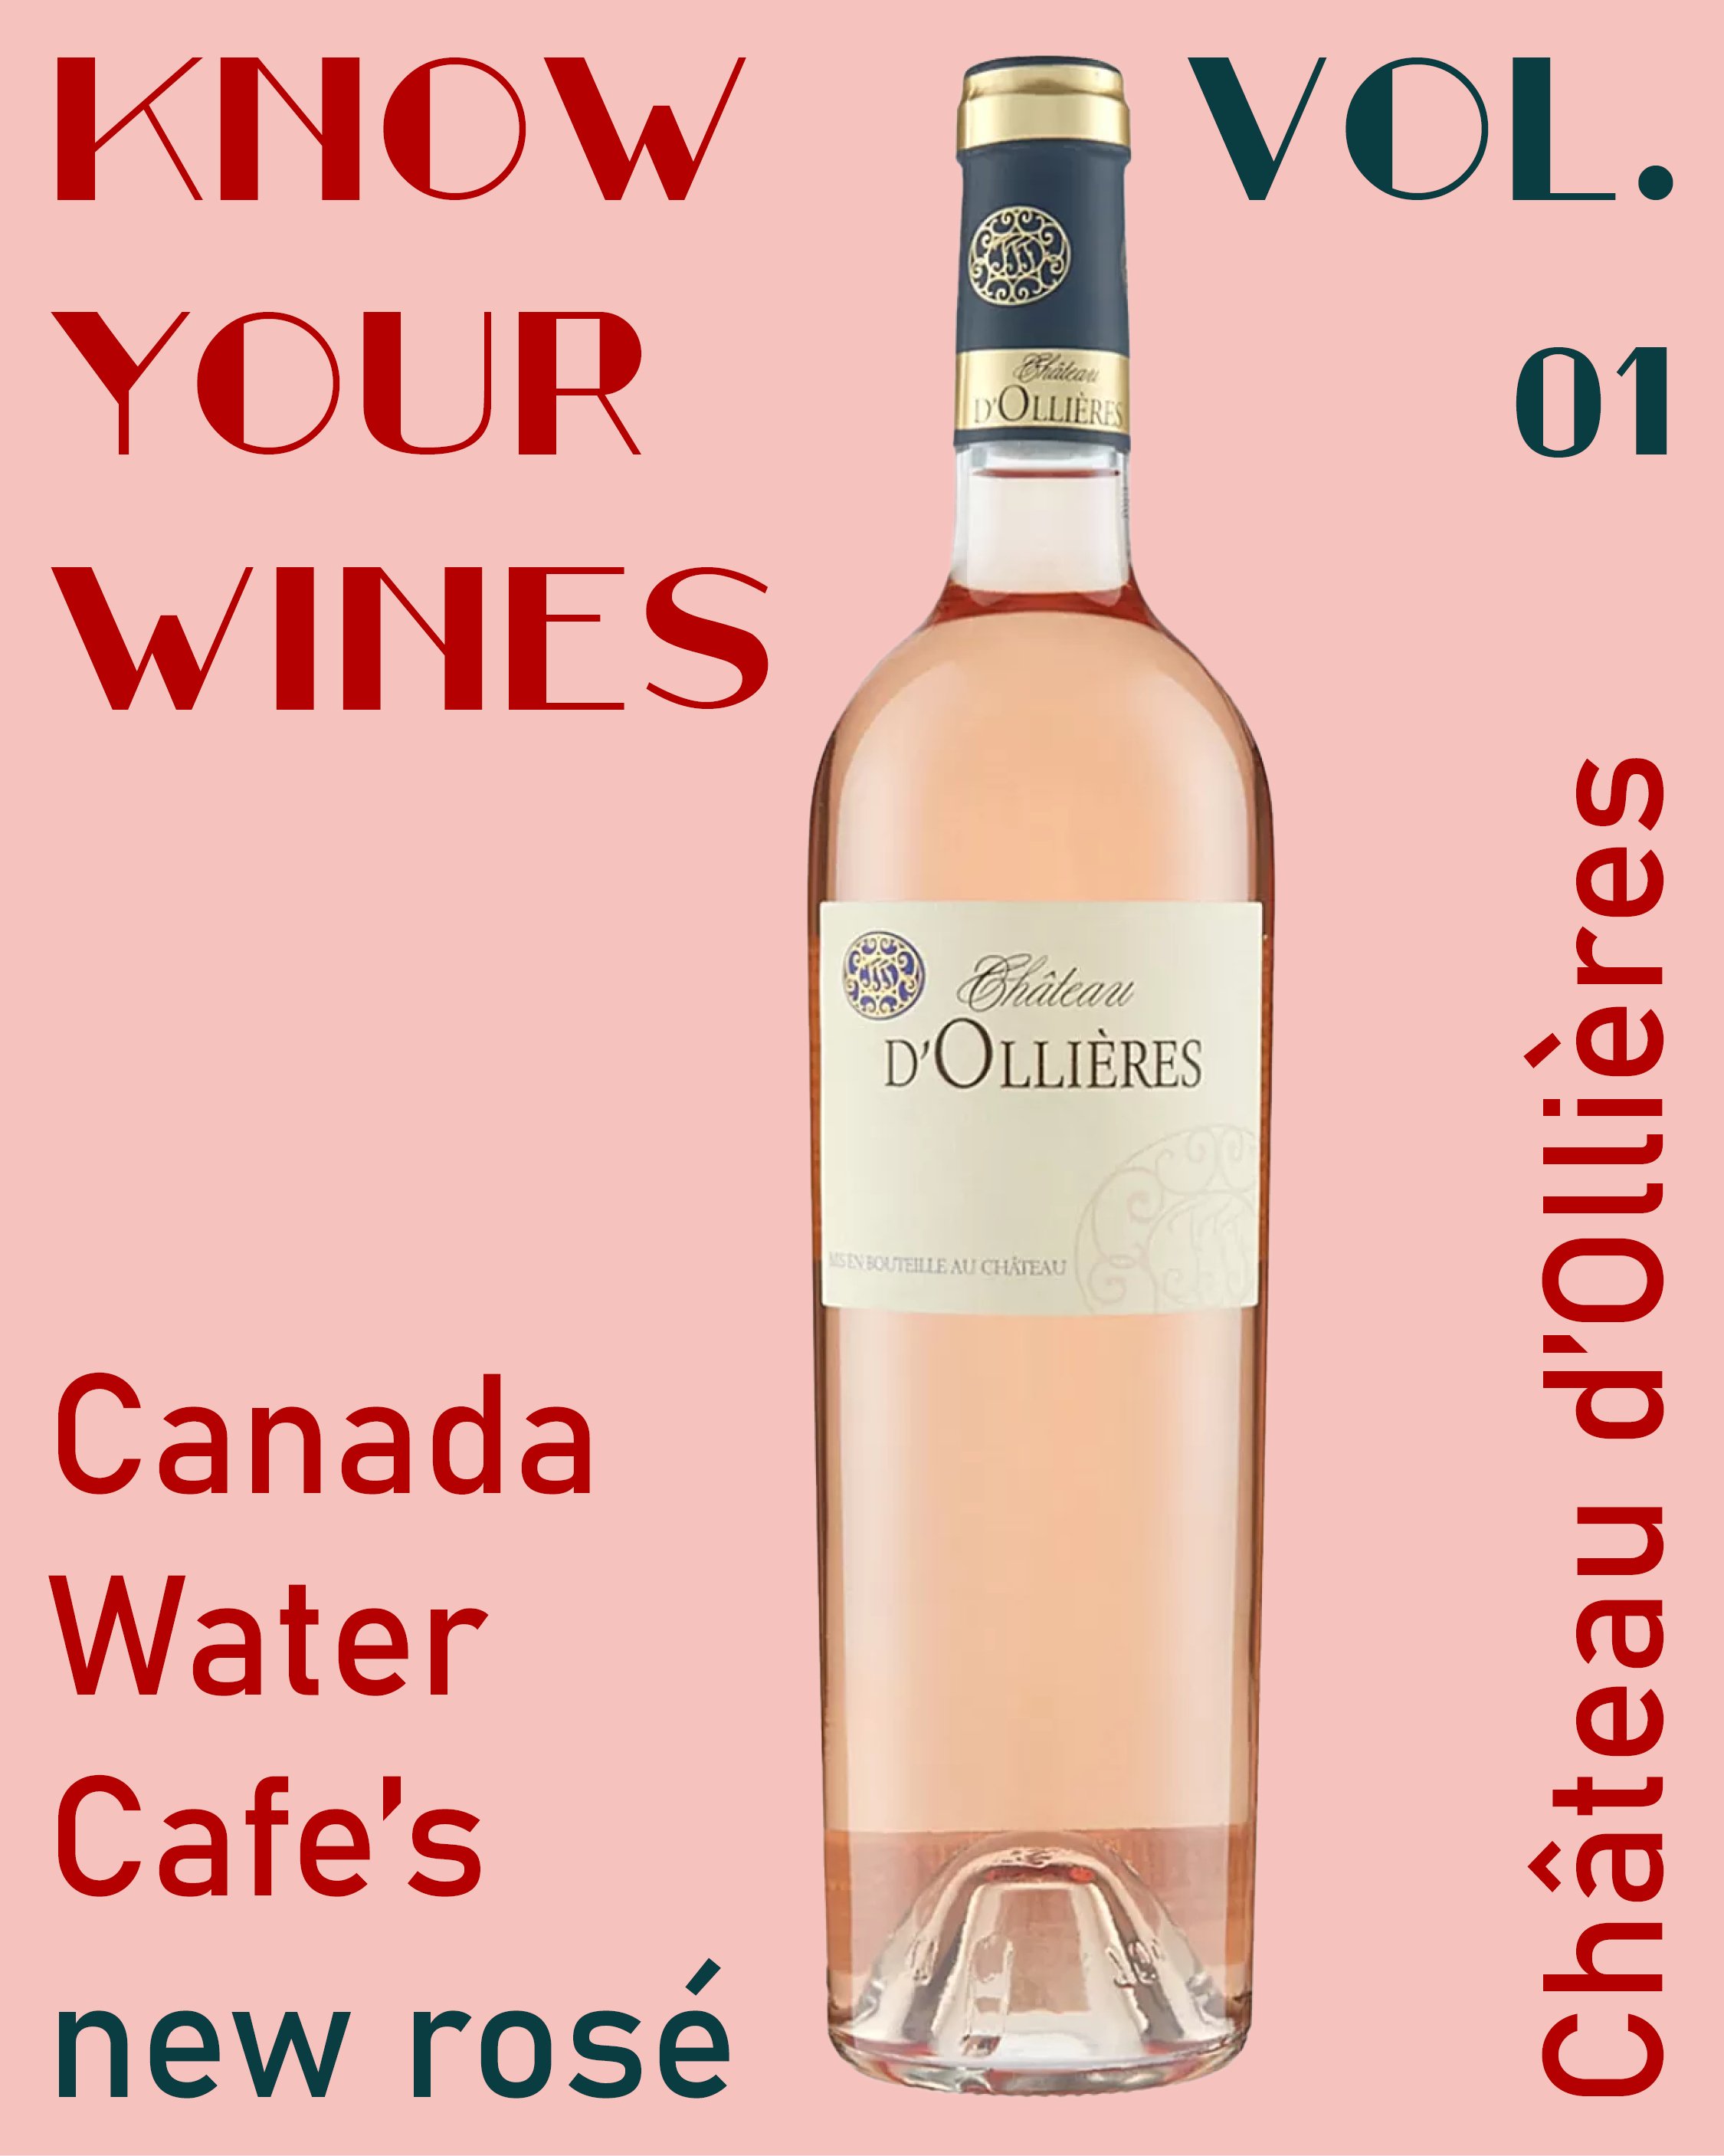 D'Olieres Rose Infographic.jpg